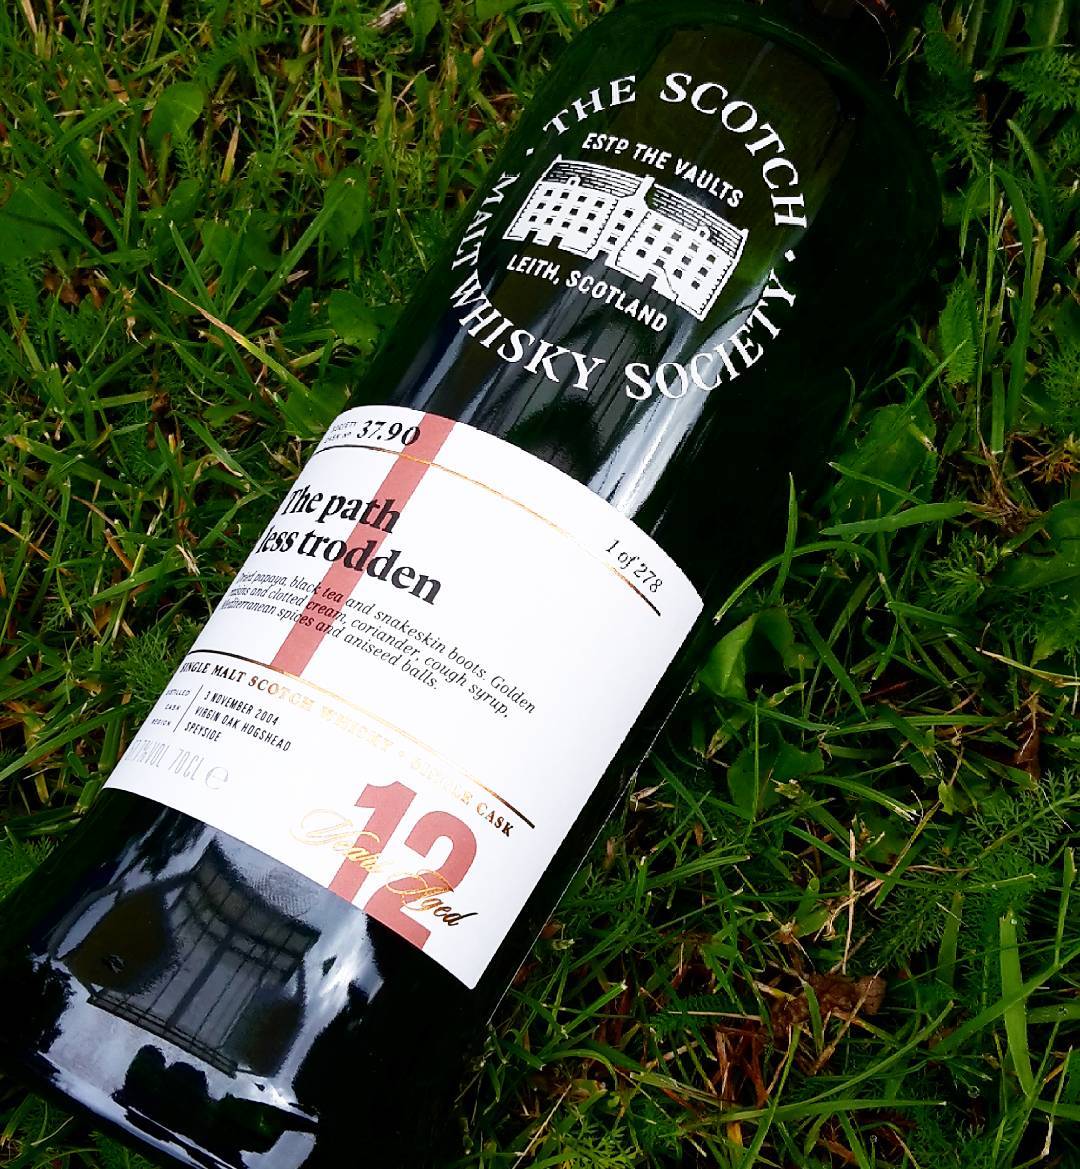 SMWS 37.90 “The path less trodden” 12 y.o 57,7% (Cragganmore)